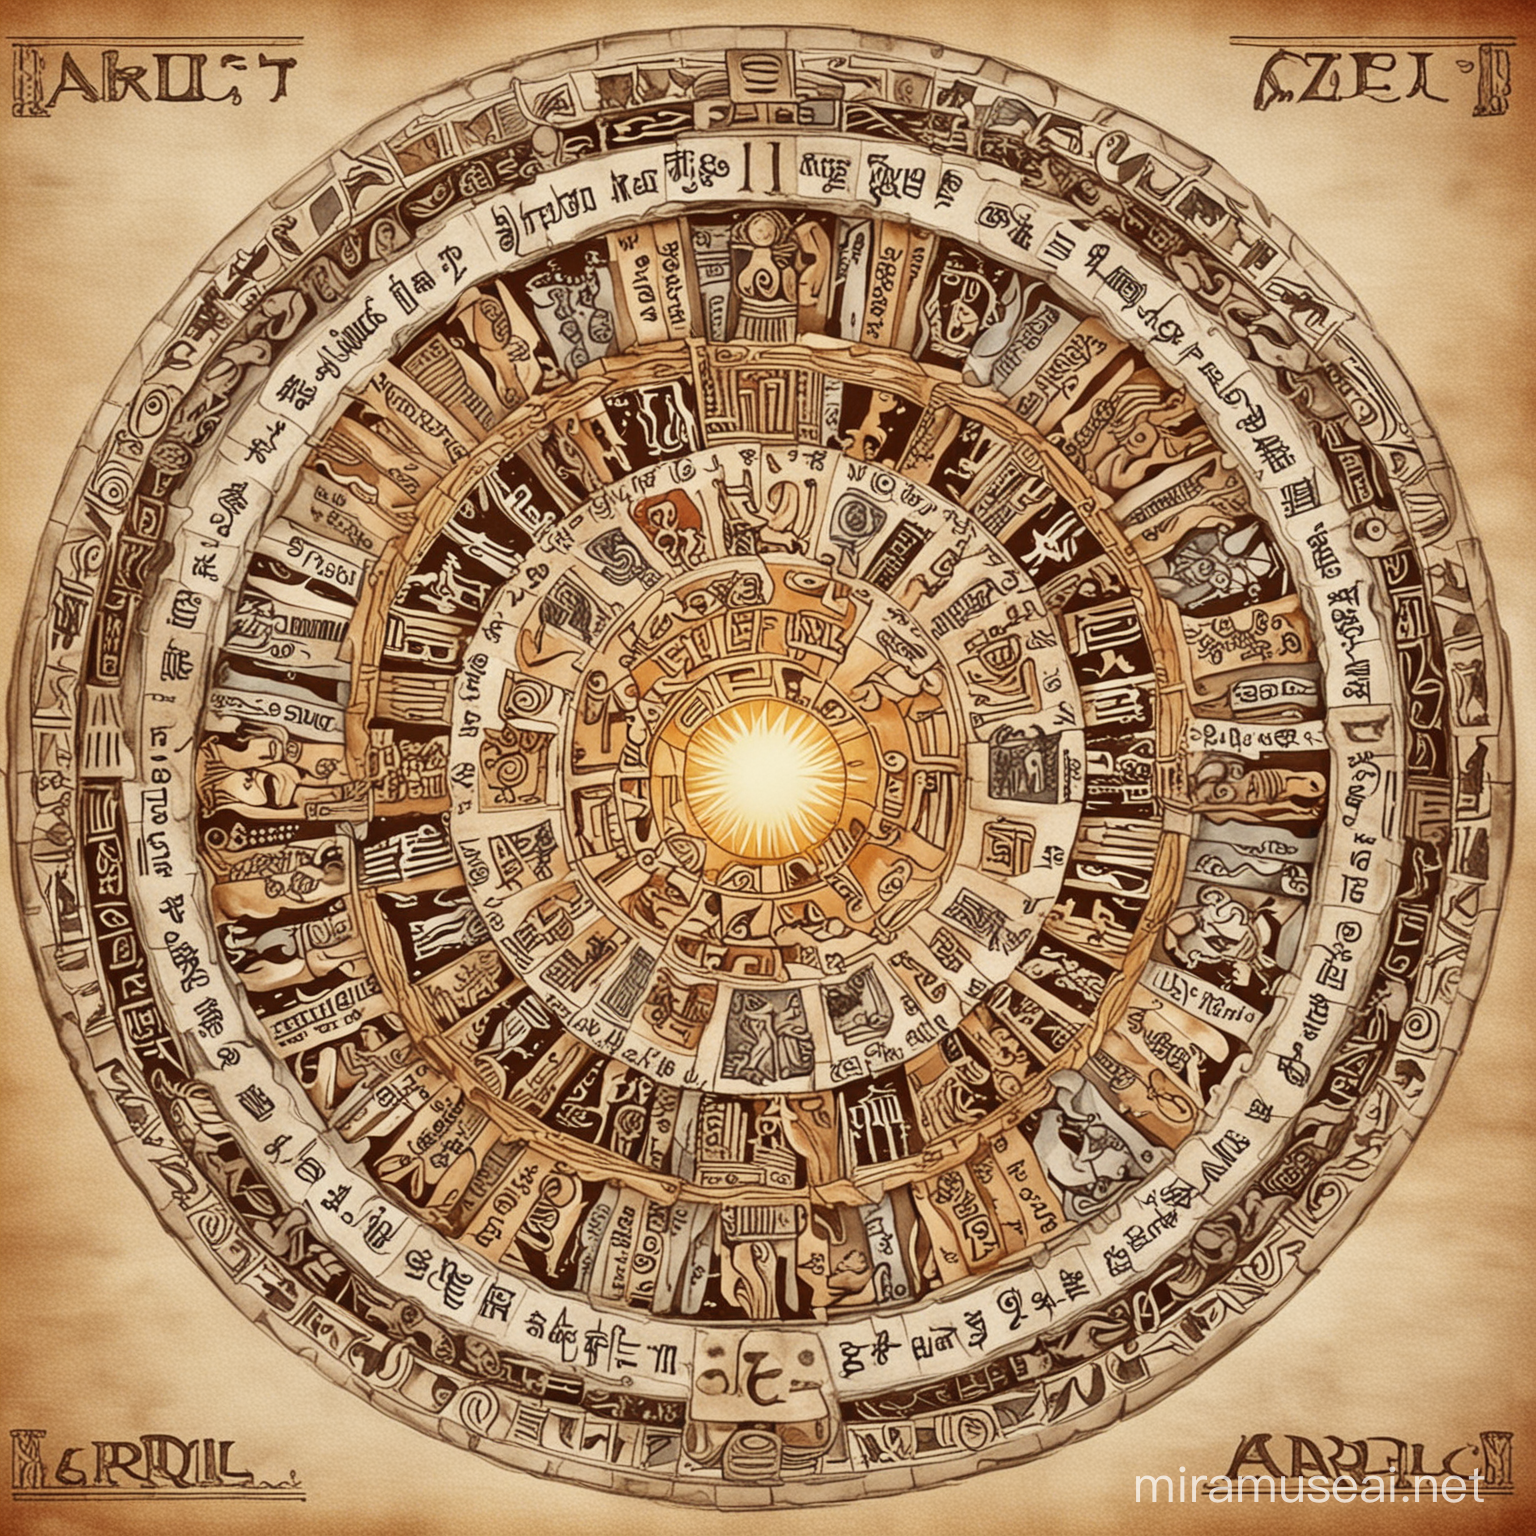 zodiac signs wheel with april  calender 
aztec border border 
sun on middle
